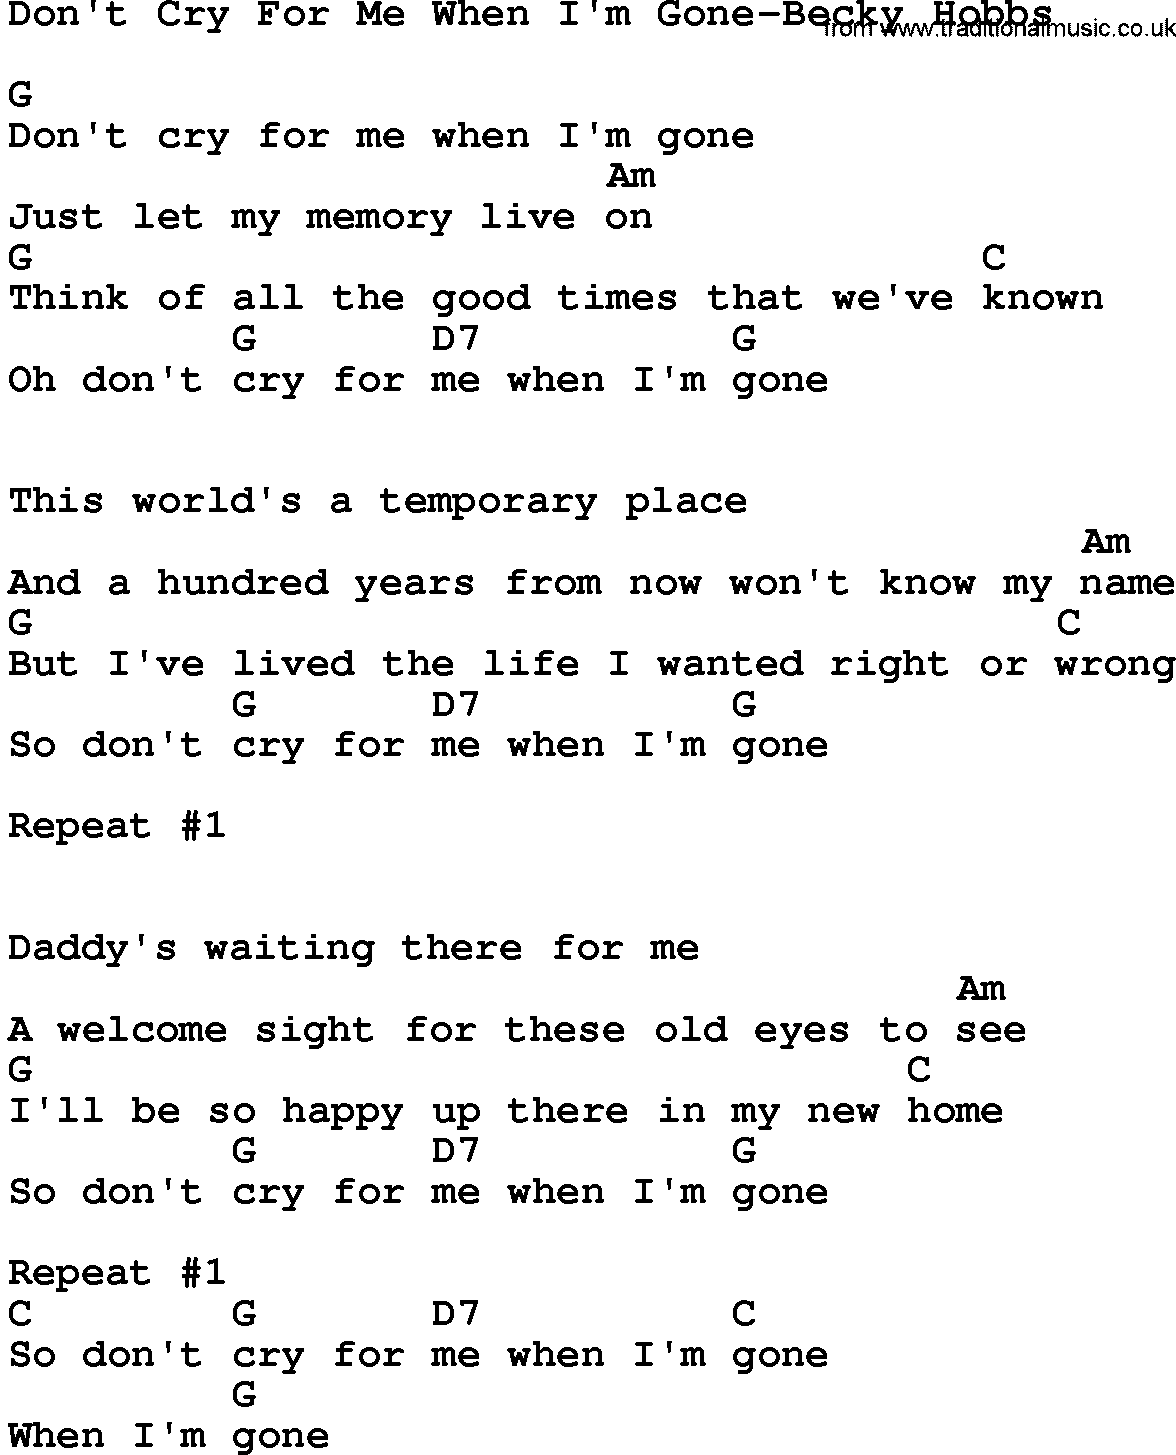 Country music song: Don't Cry For Me When I'm Gone-Becky Hobbs lyrics and chords